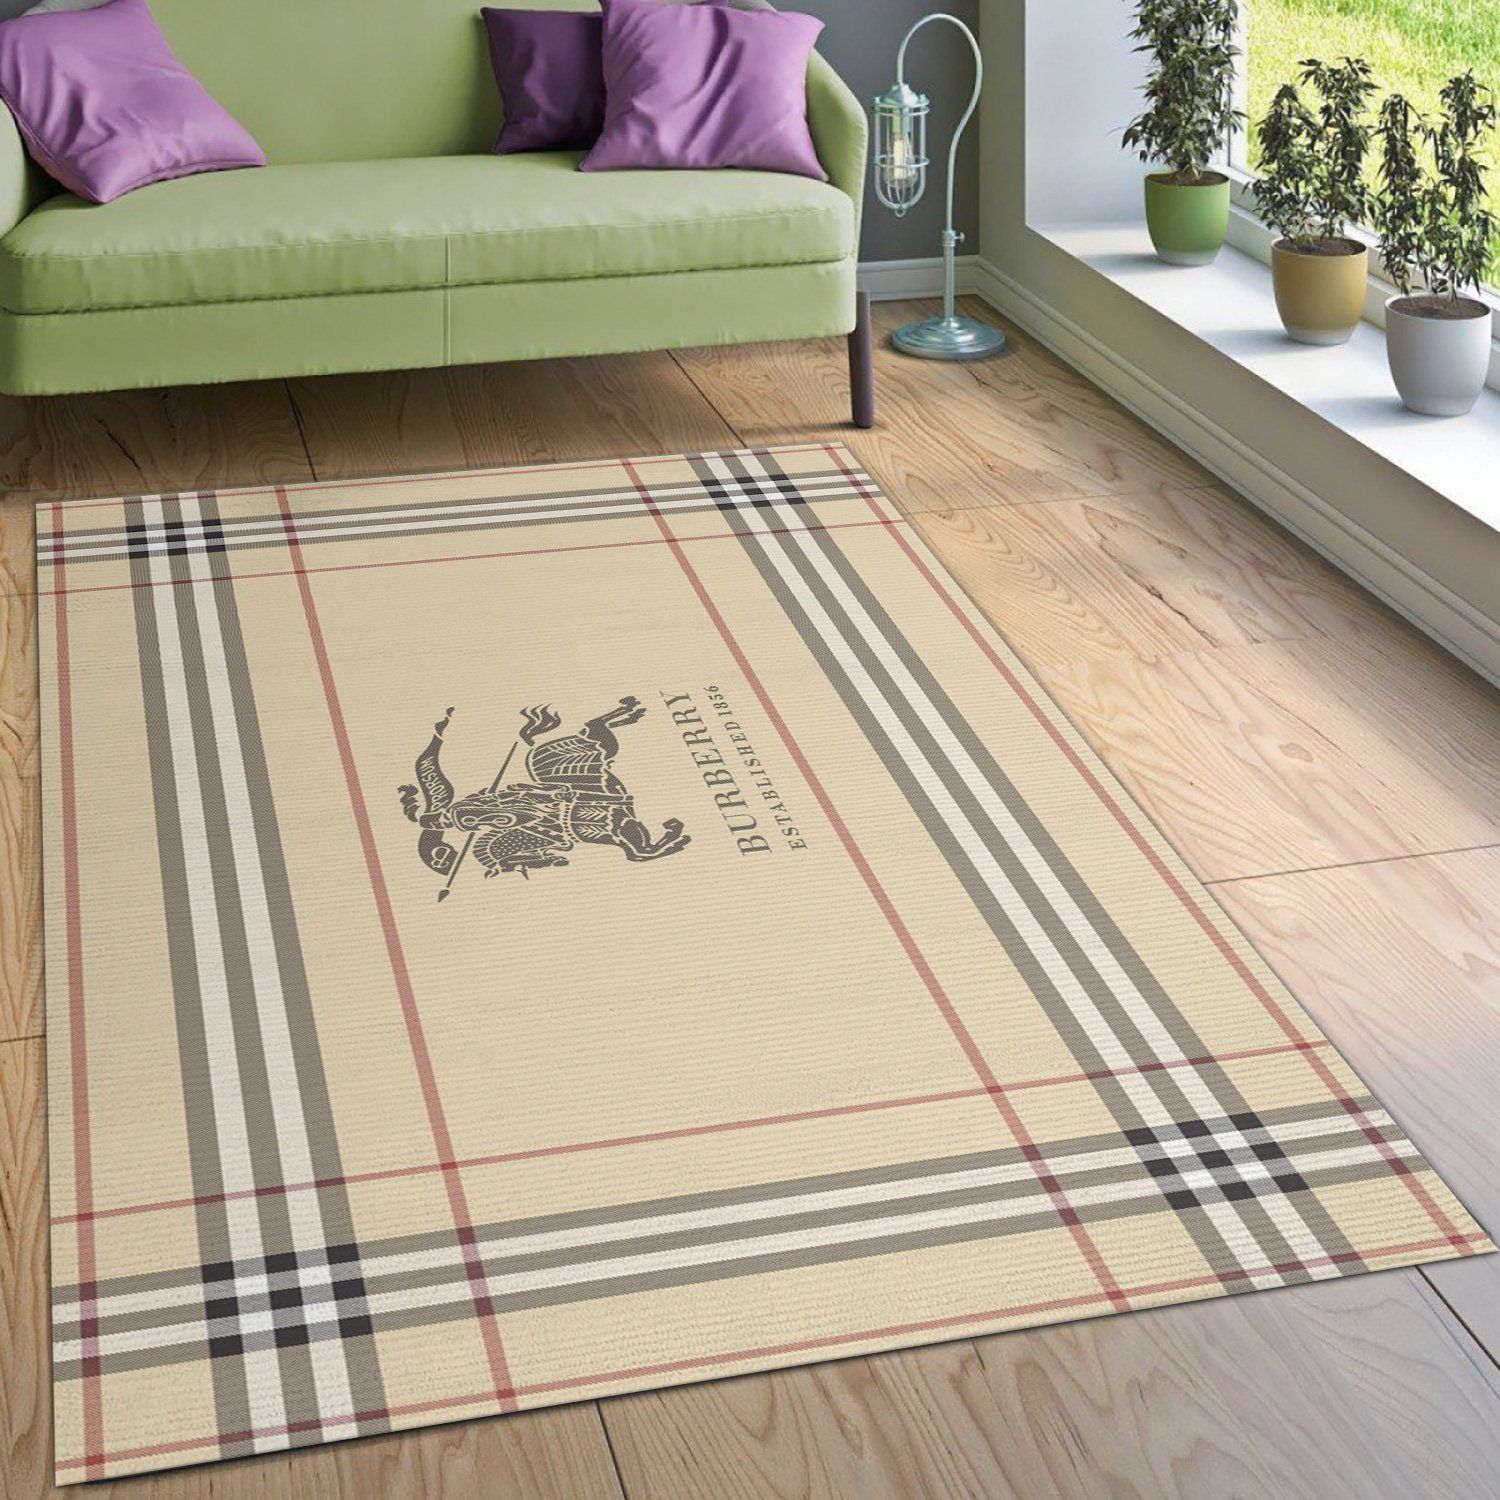 Burberry Ver2 Area Rug For Christmas Bedroom Rug Home US Decor - Indoor Outdoor Rugs 3